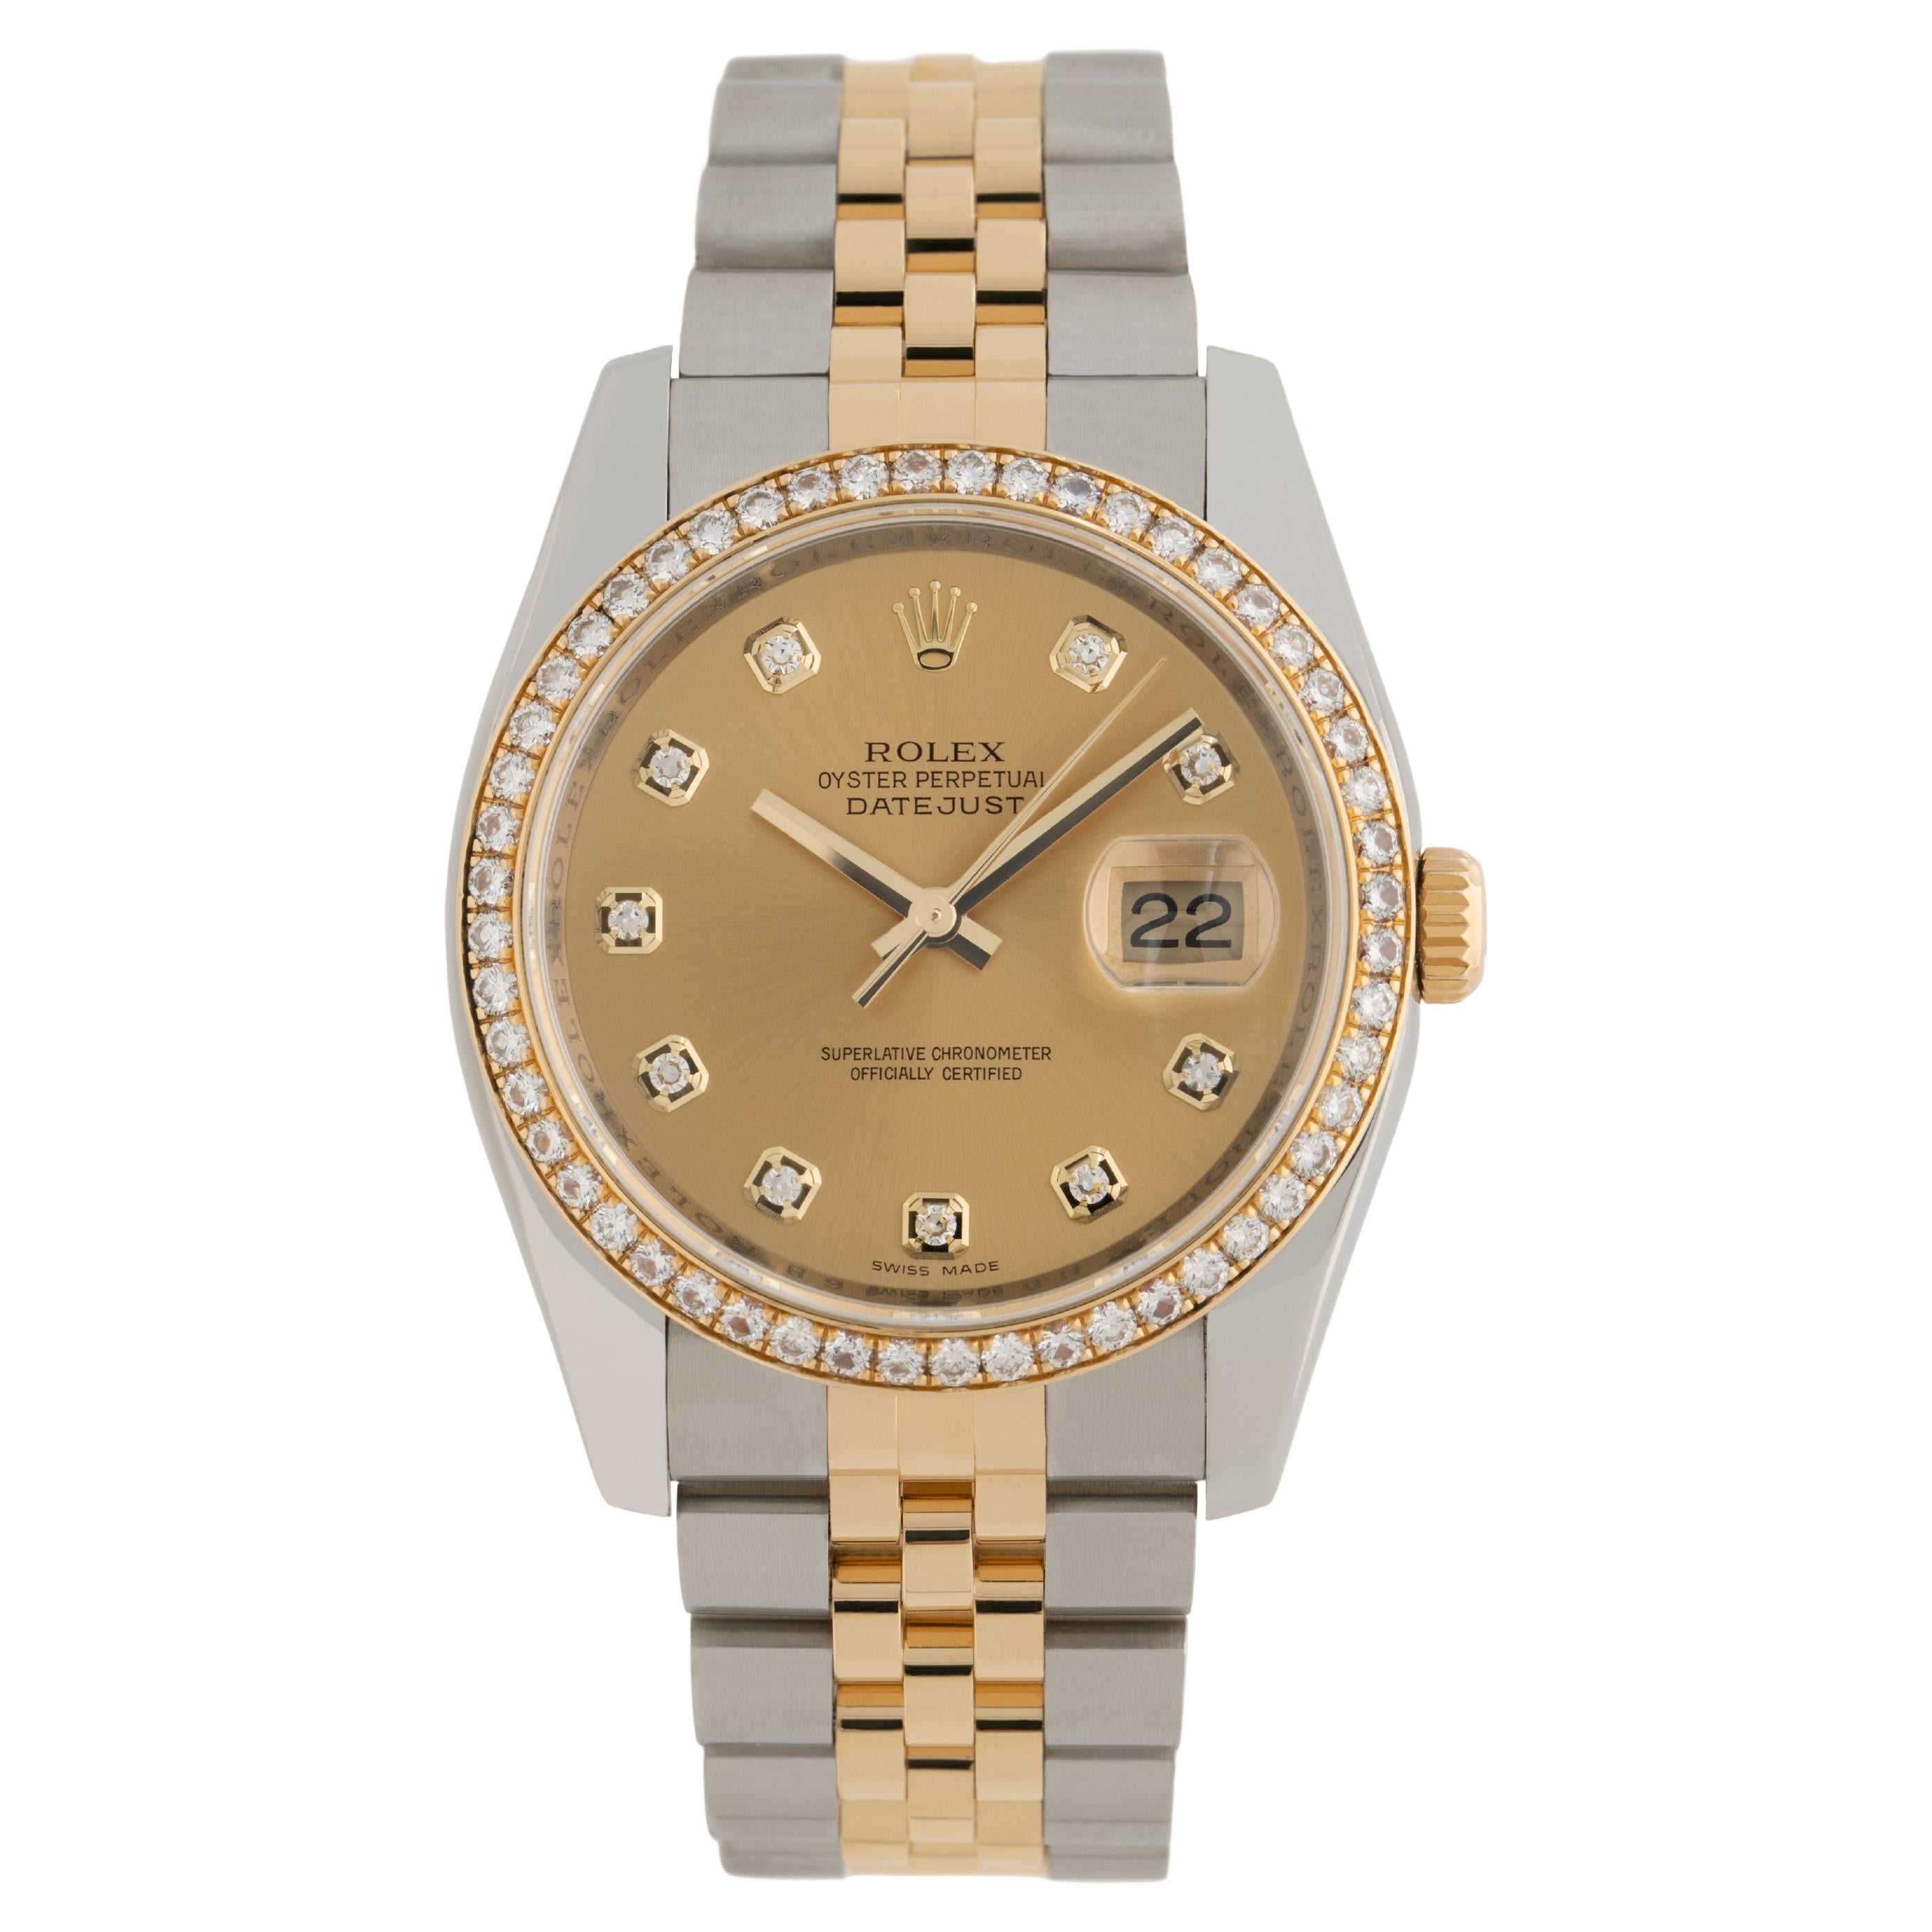 2014 Rolex DateJust Stainless Steel 18K Gold and Diamonds Model 116243 Papers For Sale